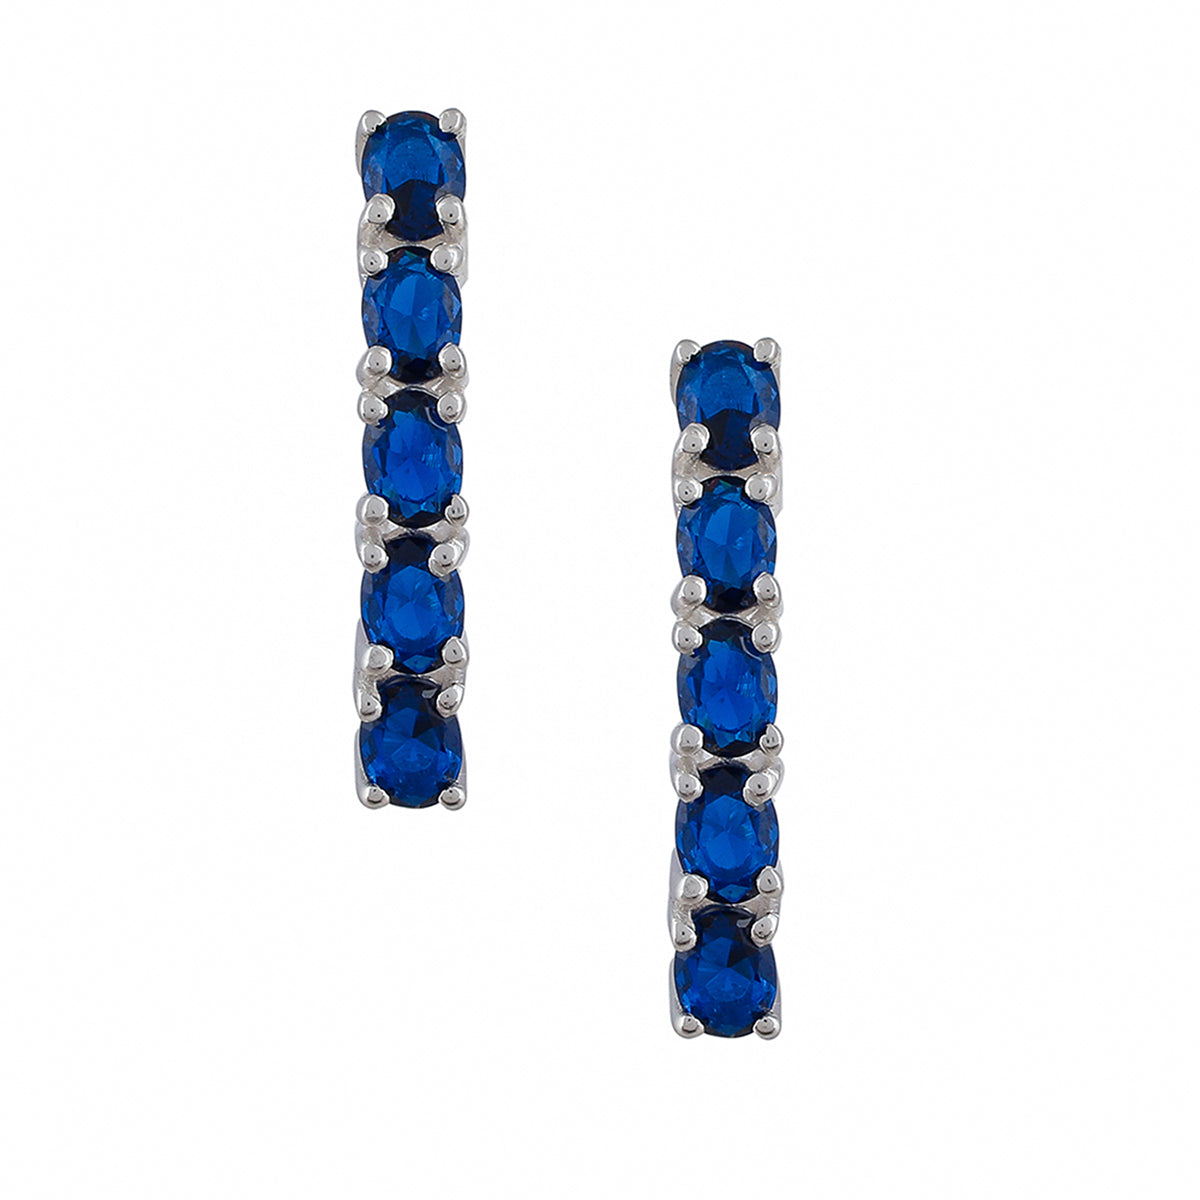 Lovely 925 Sterling Silver Hoop Earrings studded with Blue Stone